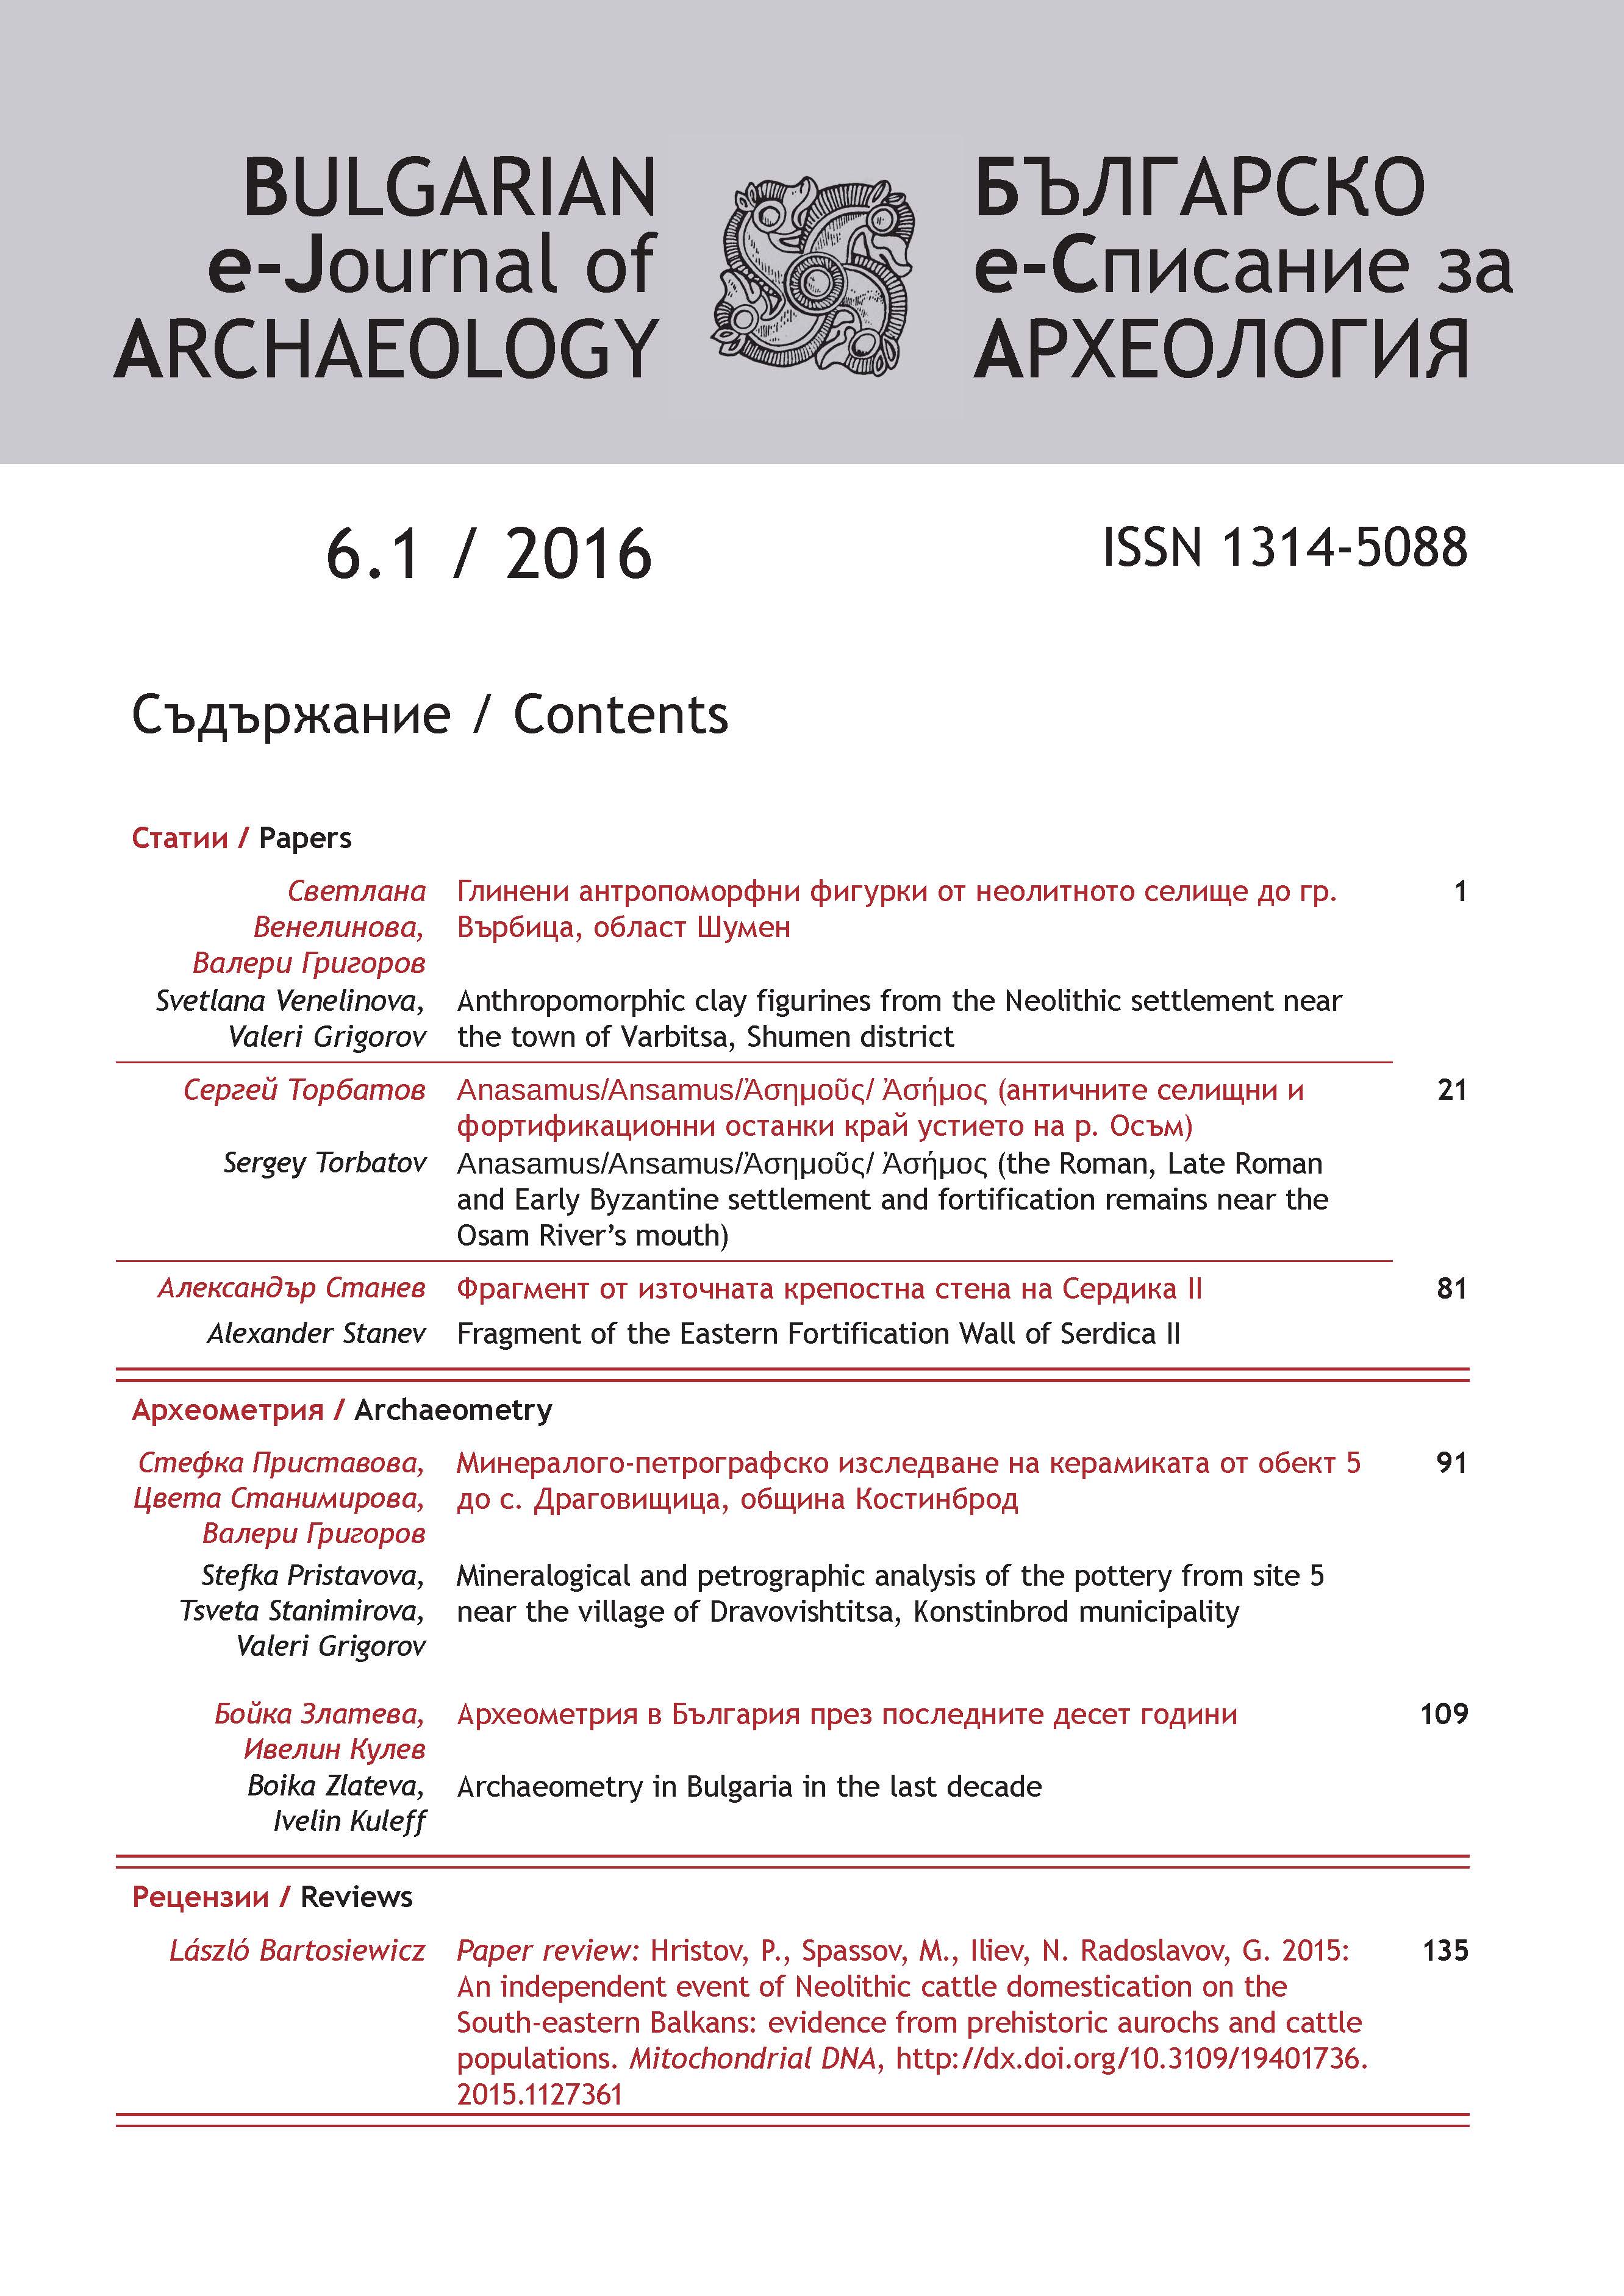 Paper review: Hristov, P., Spassov, M., Iliev, N. Radoslavov, G. 2015: An independent event of Neolithic cattle domestication on the South-eastern Balkans: evidence from prehistoric aurochs and cattle populations. Mitochondrial DNA, Cover Image